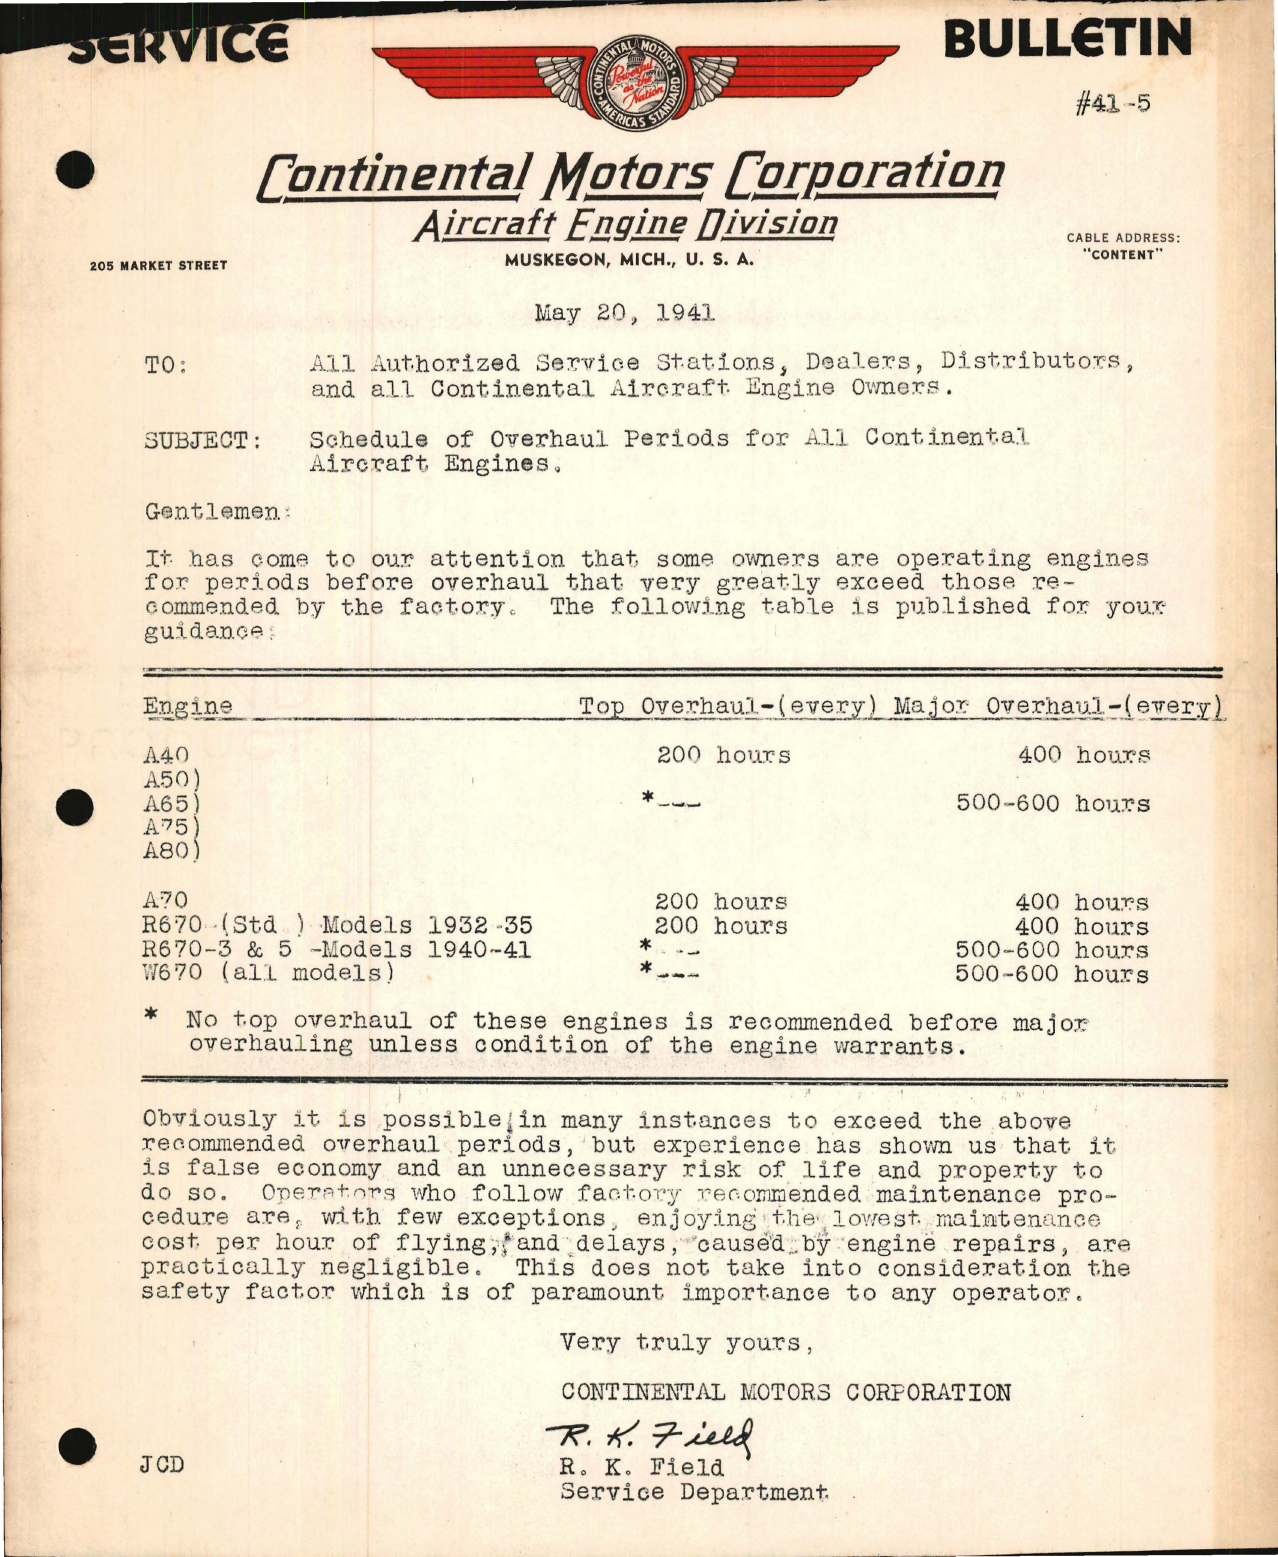 Sample page 1 from AirCorps Library document: Schedule of Overhaul Periods for all Continental Aircraft Engines